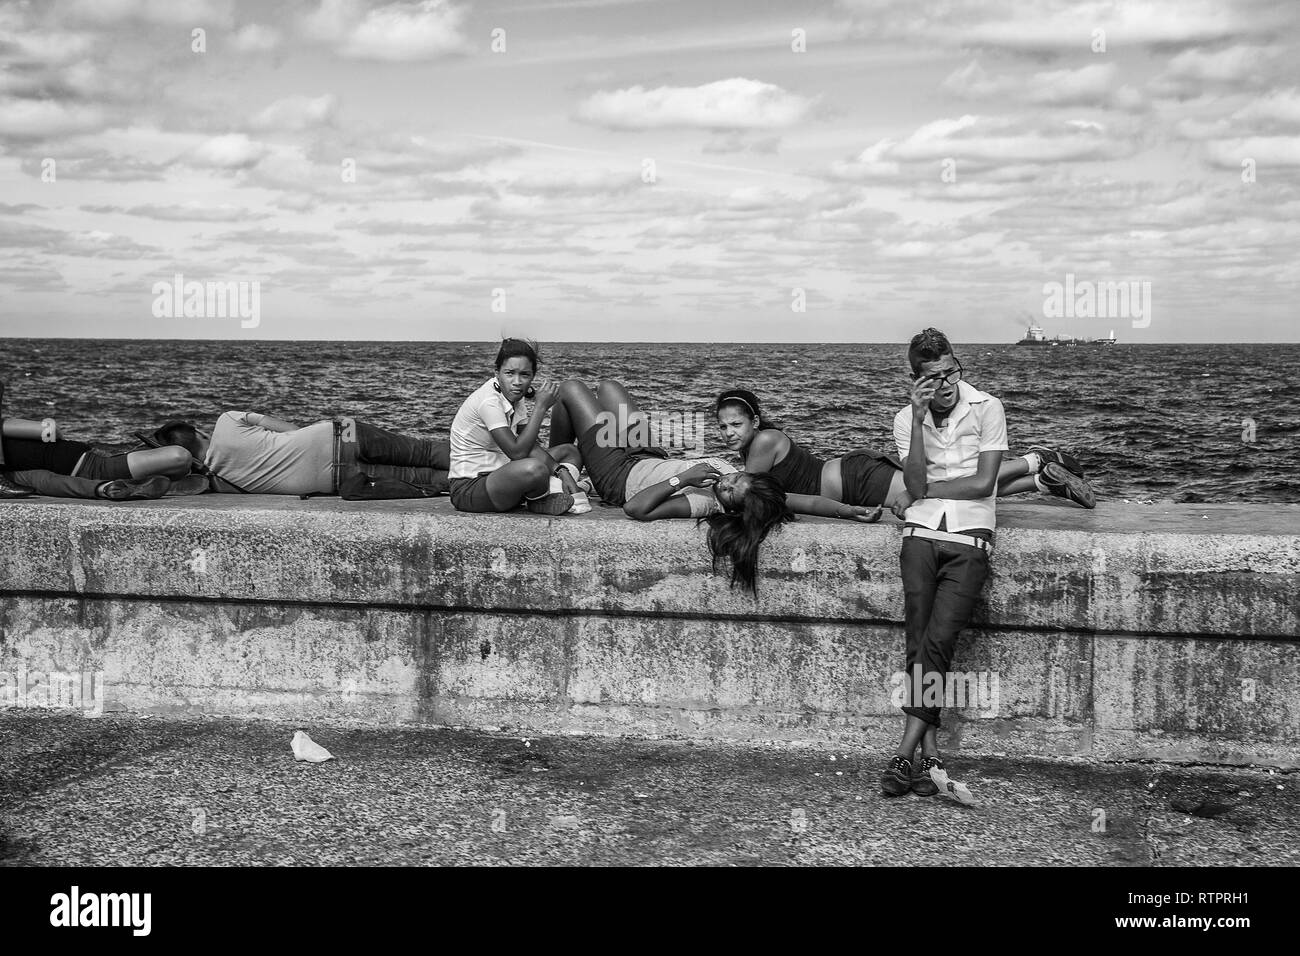 Havana, Cuba - 22 January 2013: A view of the streets of the city with cuban people. A group of teenagers relaxed on seawall malecon. Stock Photo